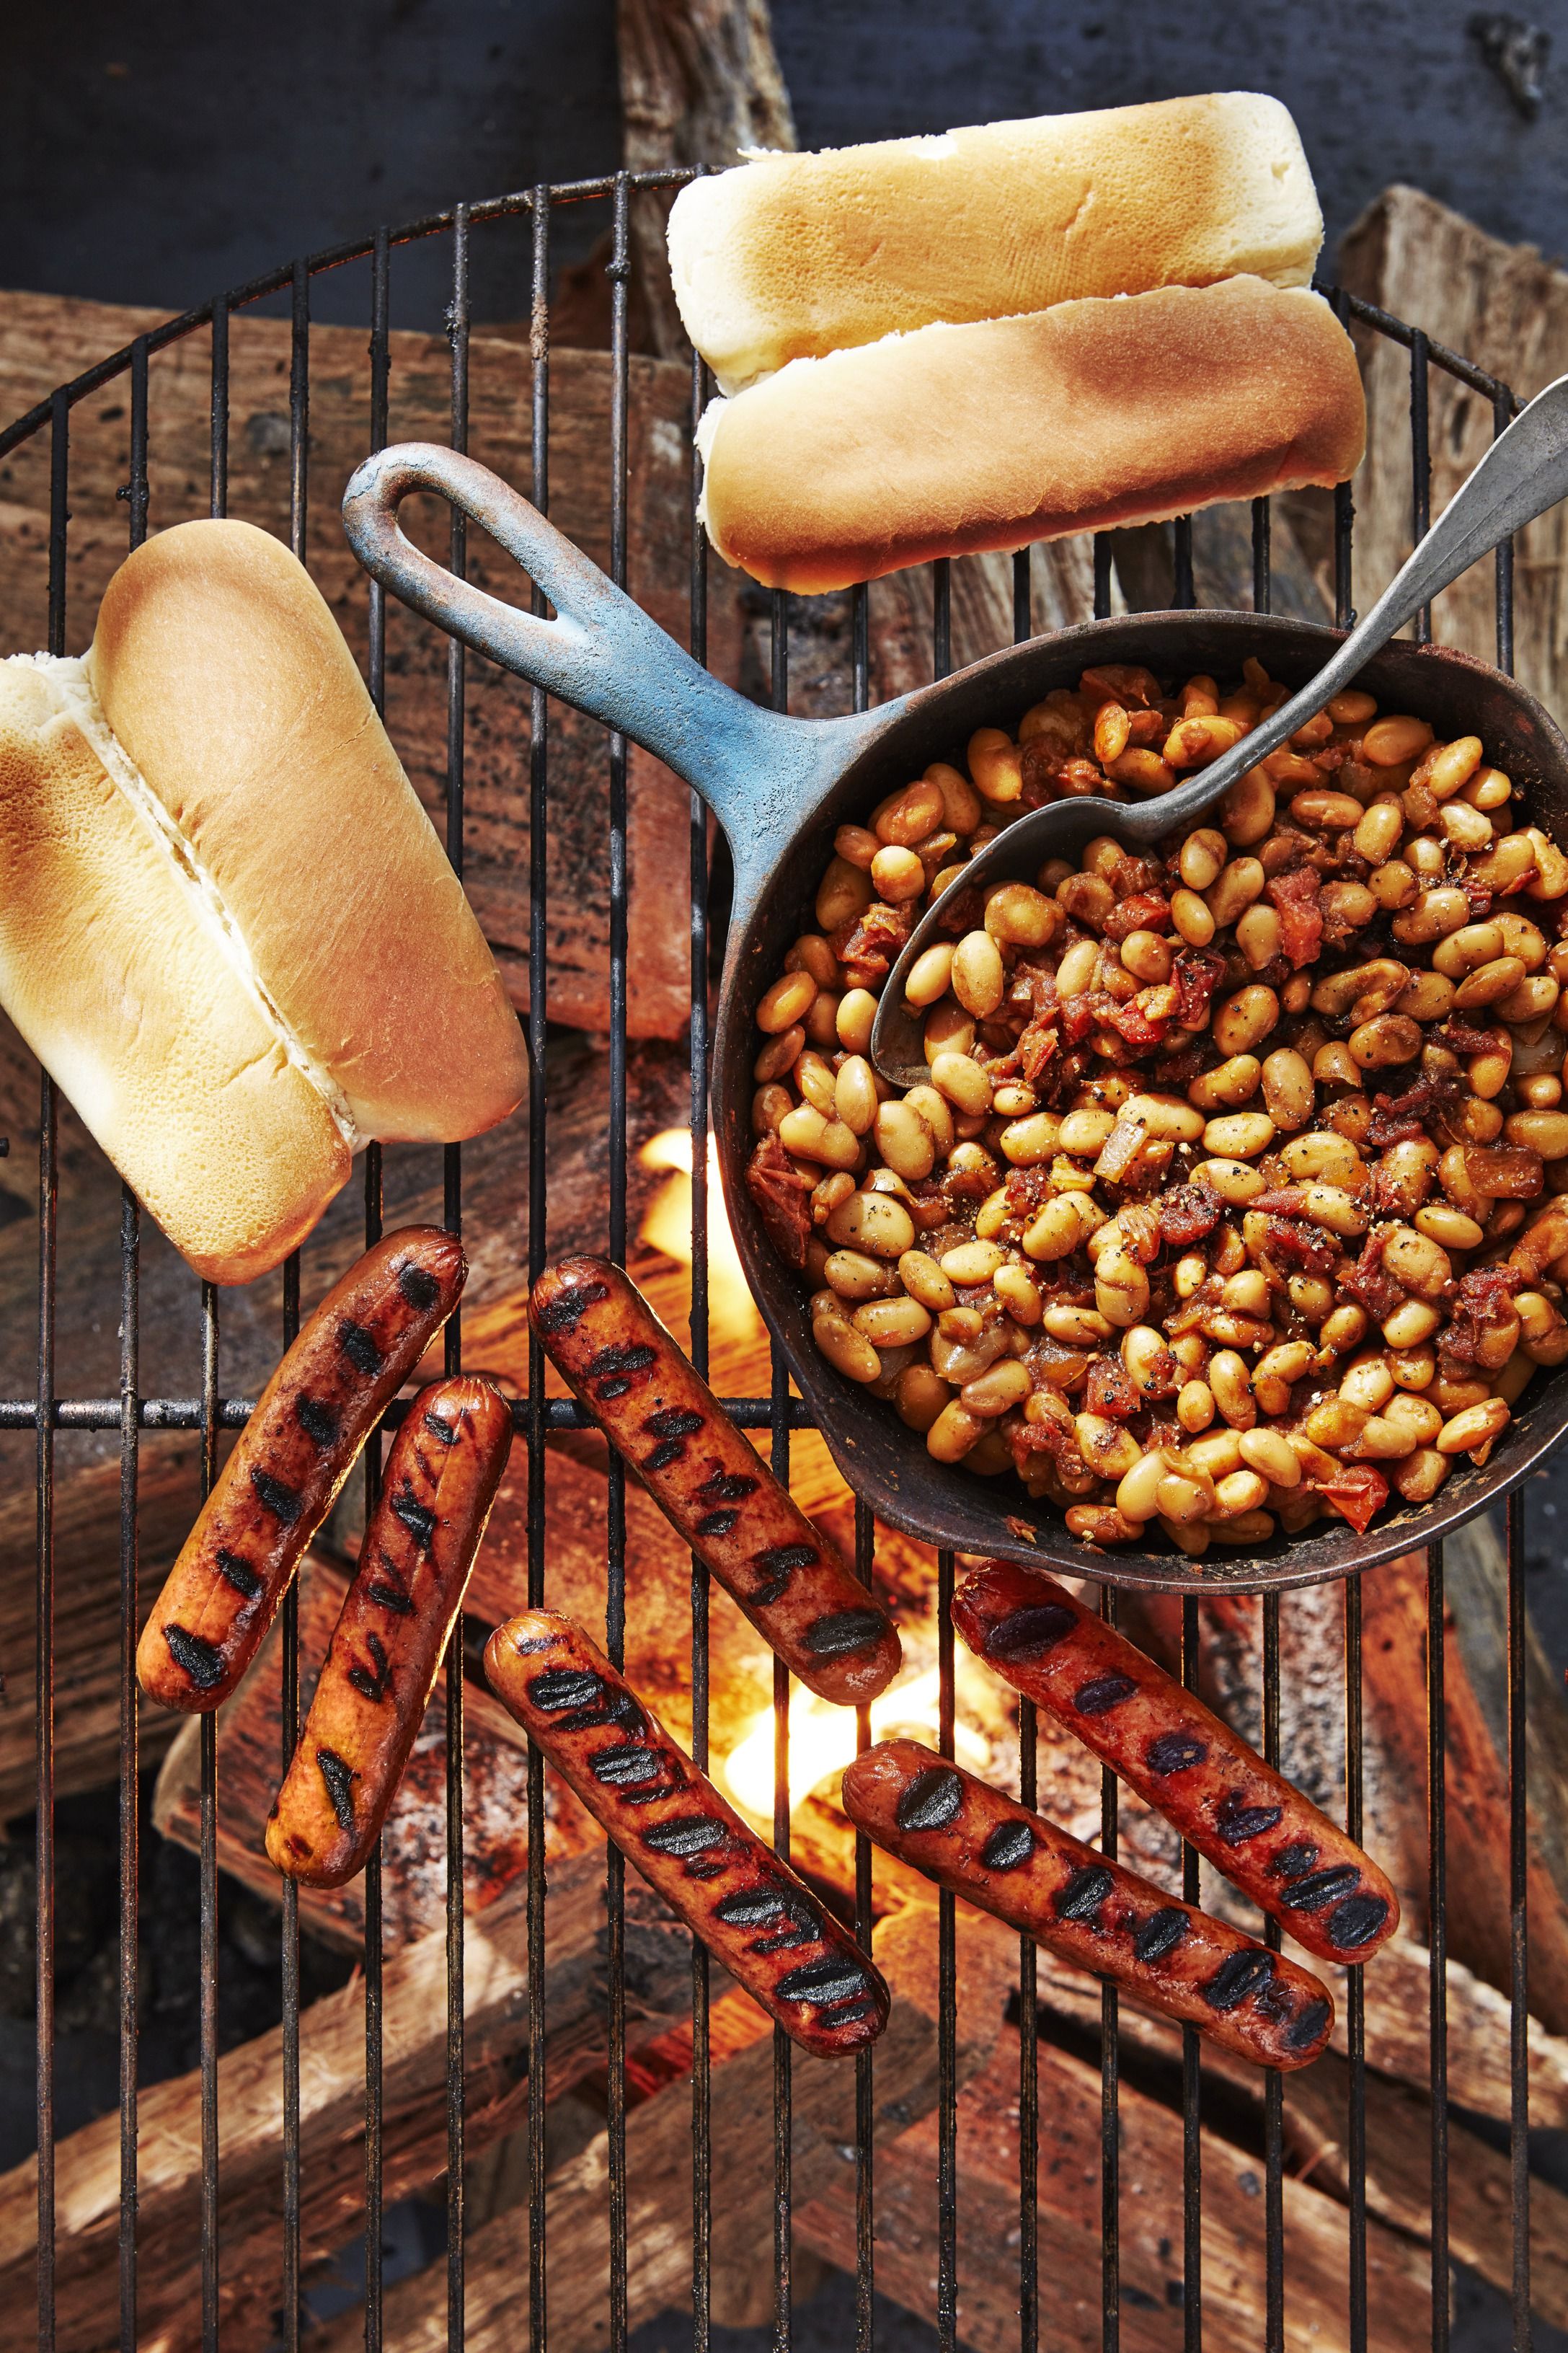 Best Hot Dogs With Quick Cast Iron Beans How To Make Hot Dogs With Quick Cast Iron Beans